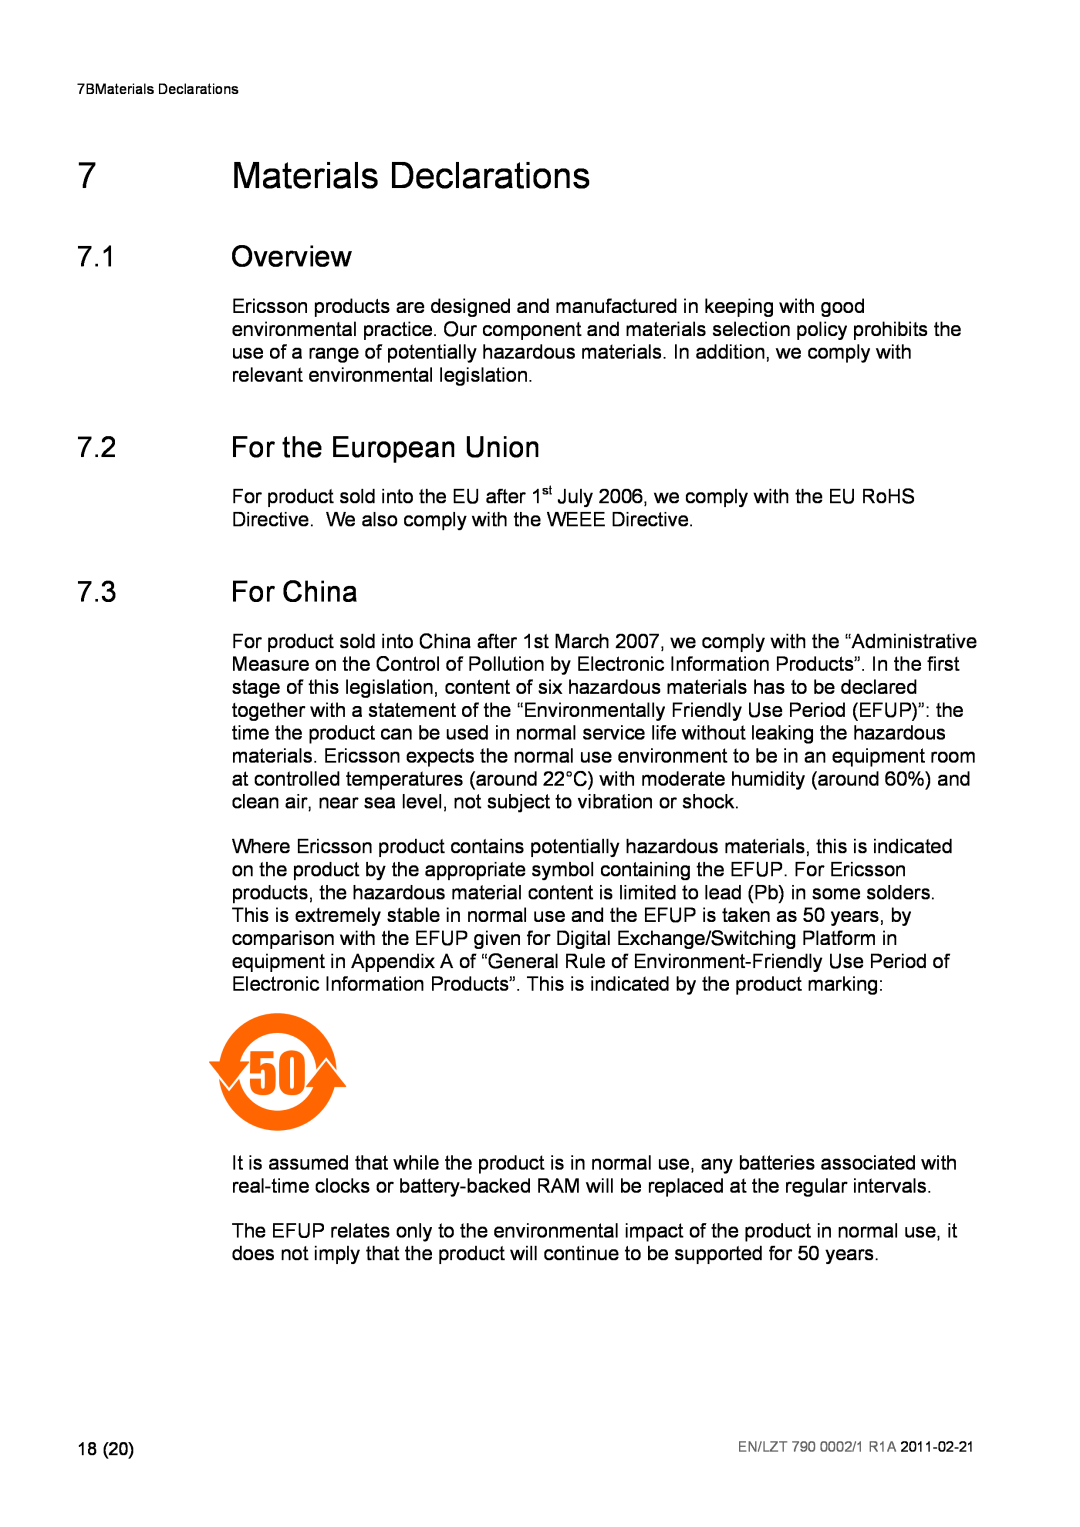 Ericsson TT1222 manual Materials Declarations, 7.1Overview, 7.2For the European Union, 7.3For China 